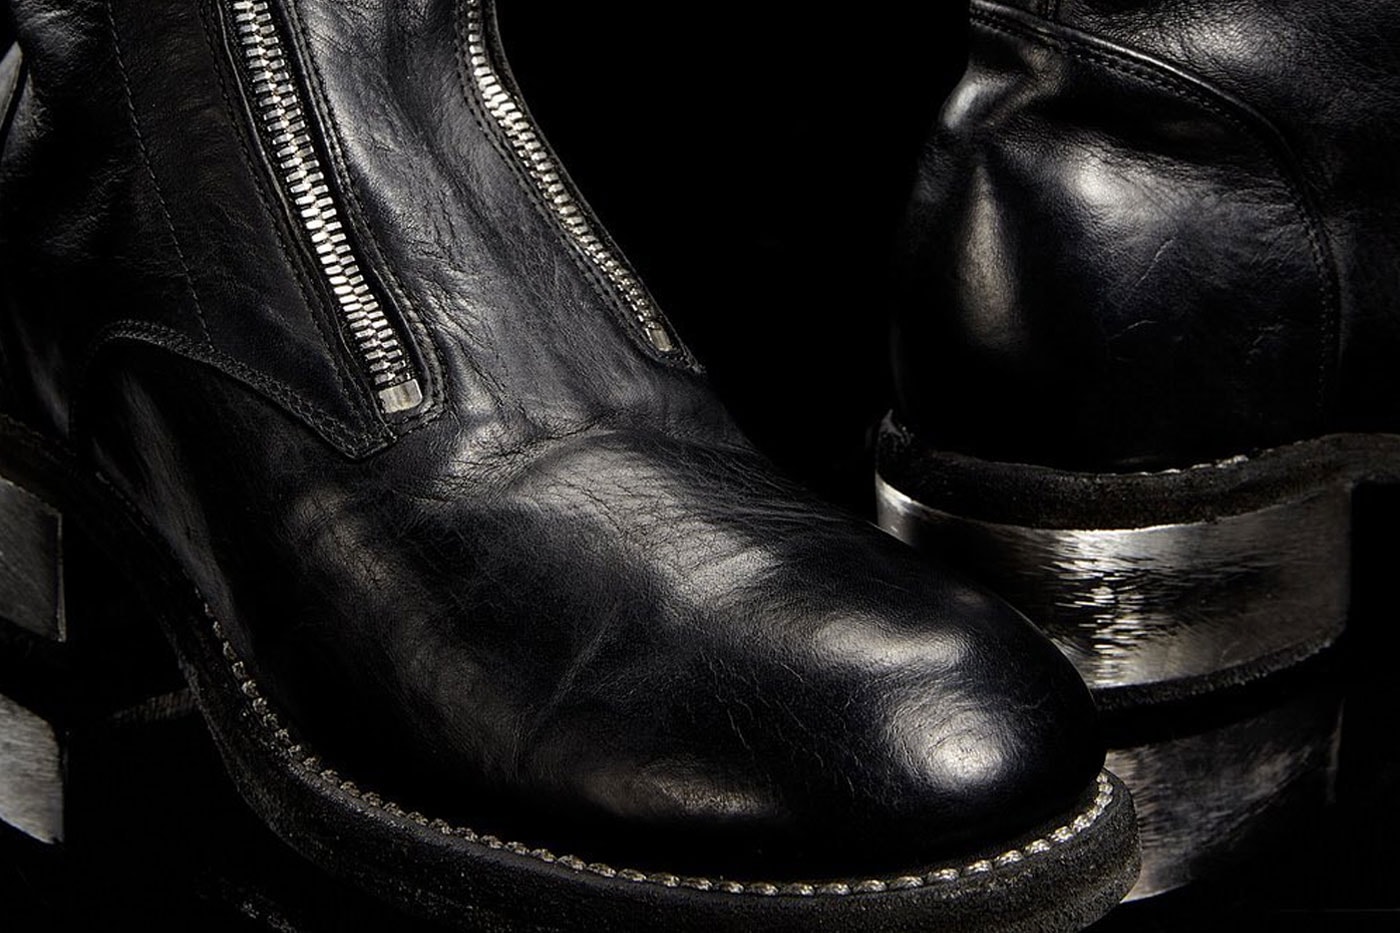 GUIDI The Matrix Resurrections leather kangaroo costume boots 925 sterling silver three ring nail necklace release info 